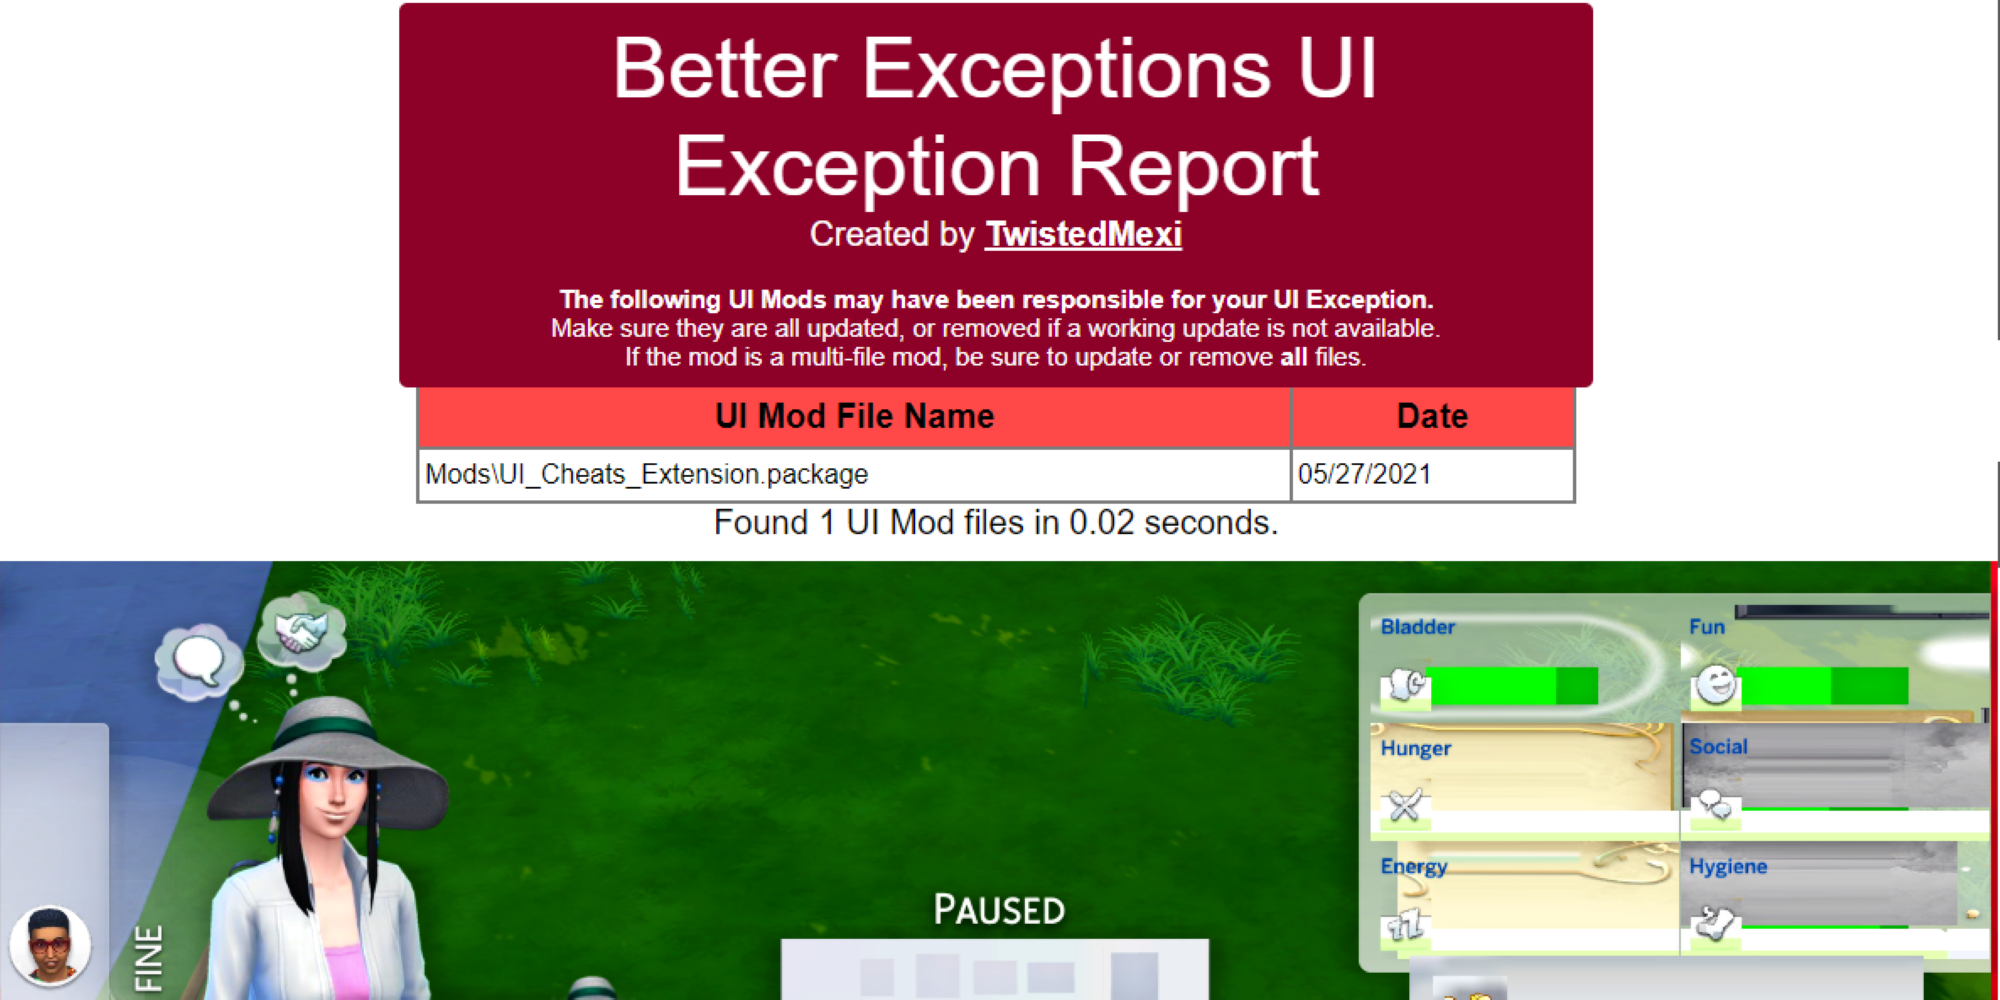 Screenshot of a word document detailing 'Better Exceptions UI Exception Report' overlayed on top of a screenshot from The Sims 4 that appears to be bugged.